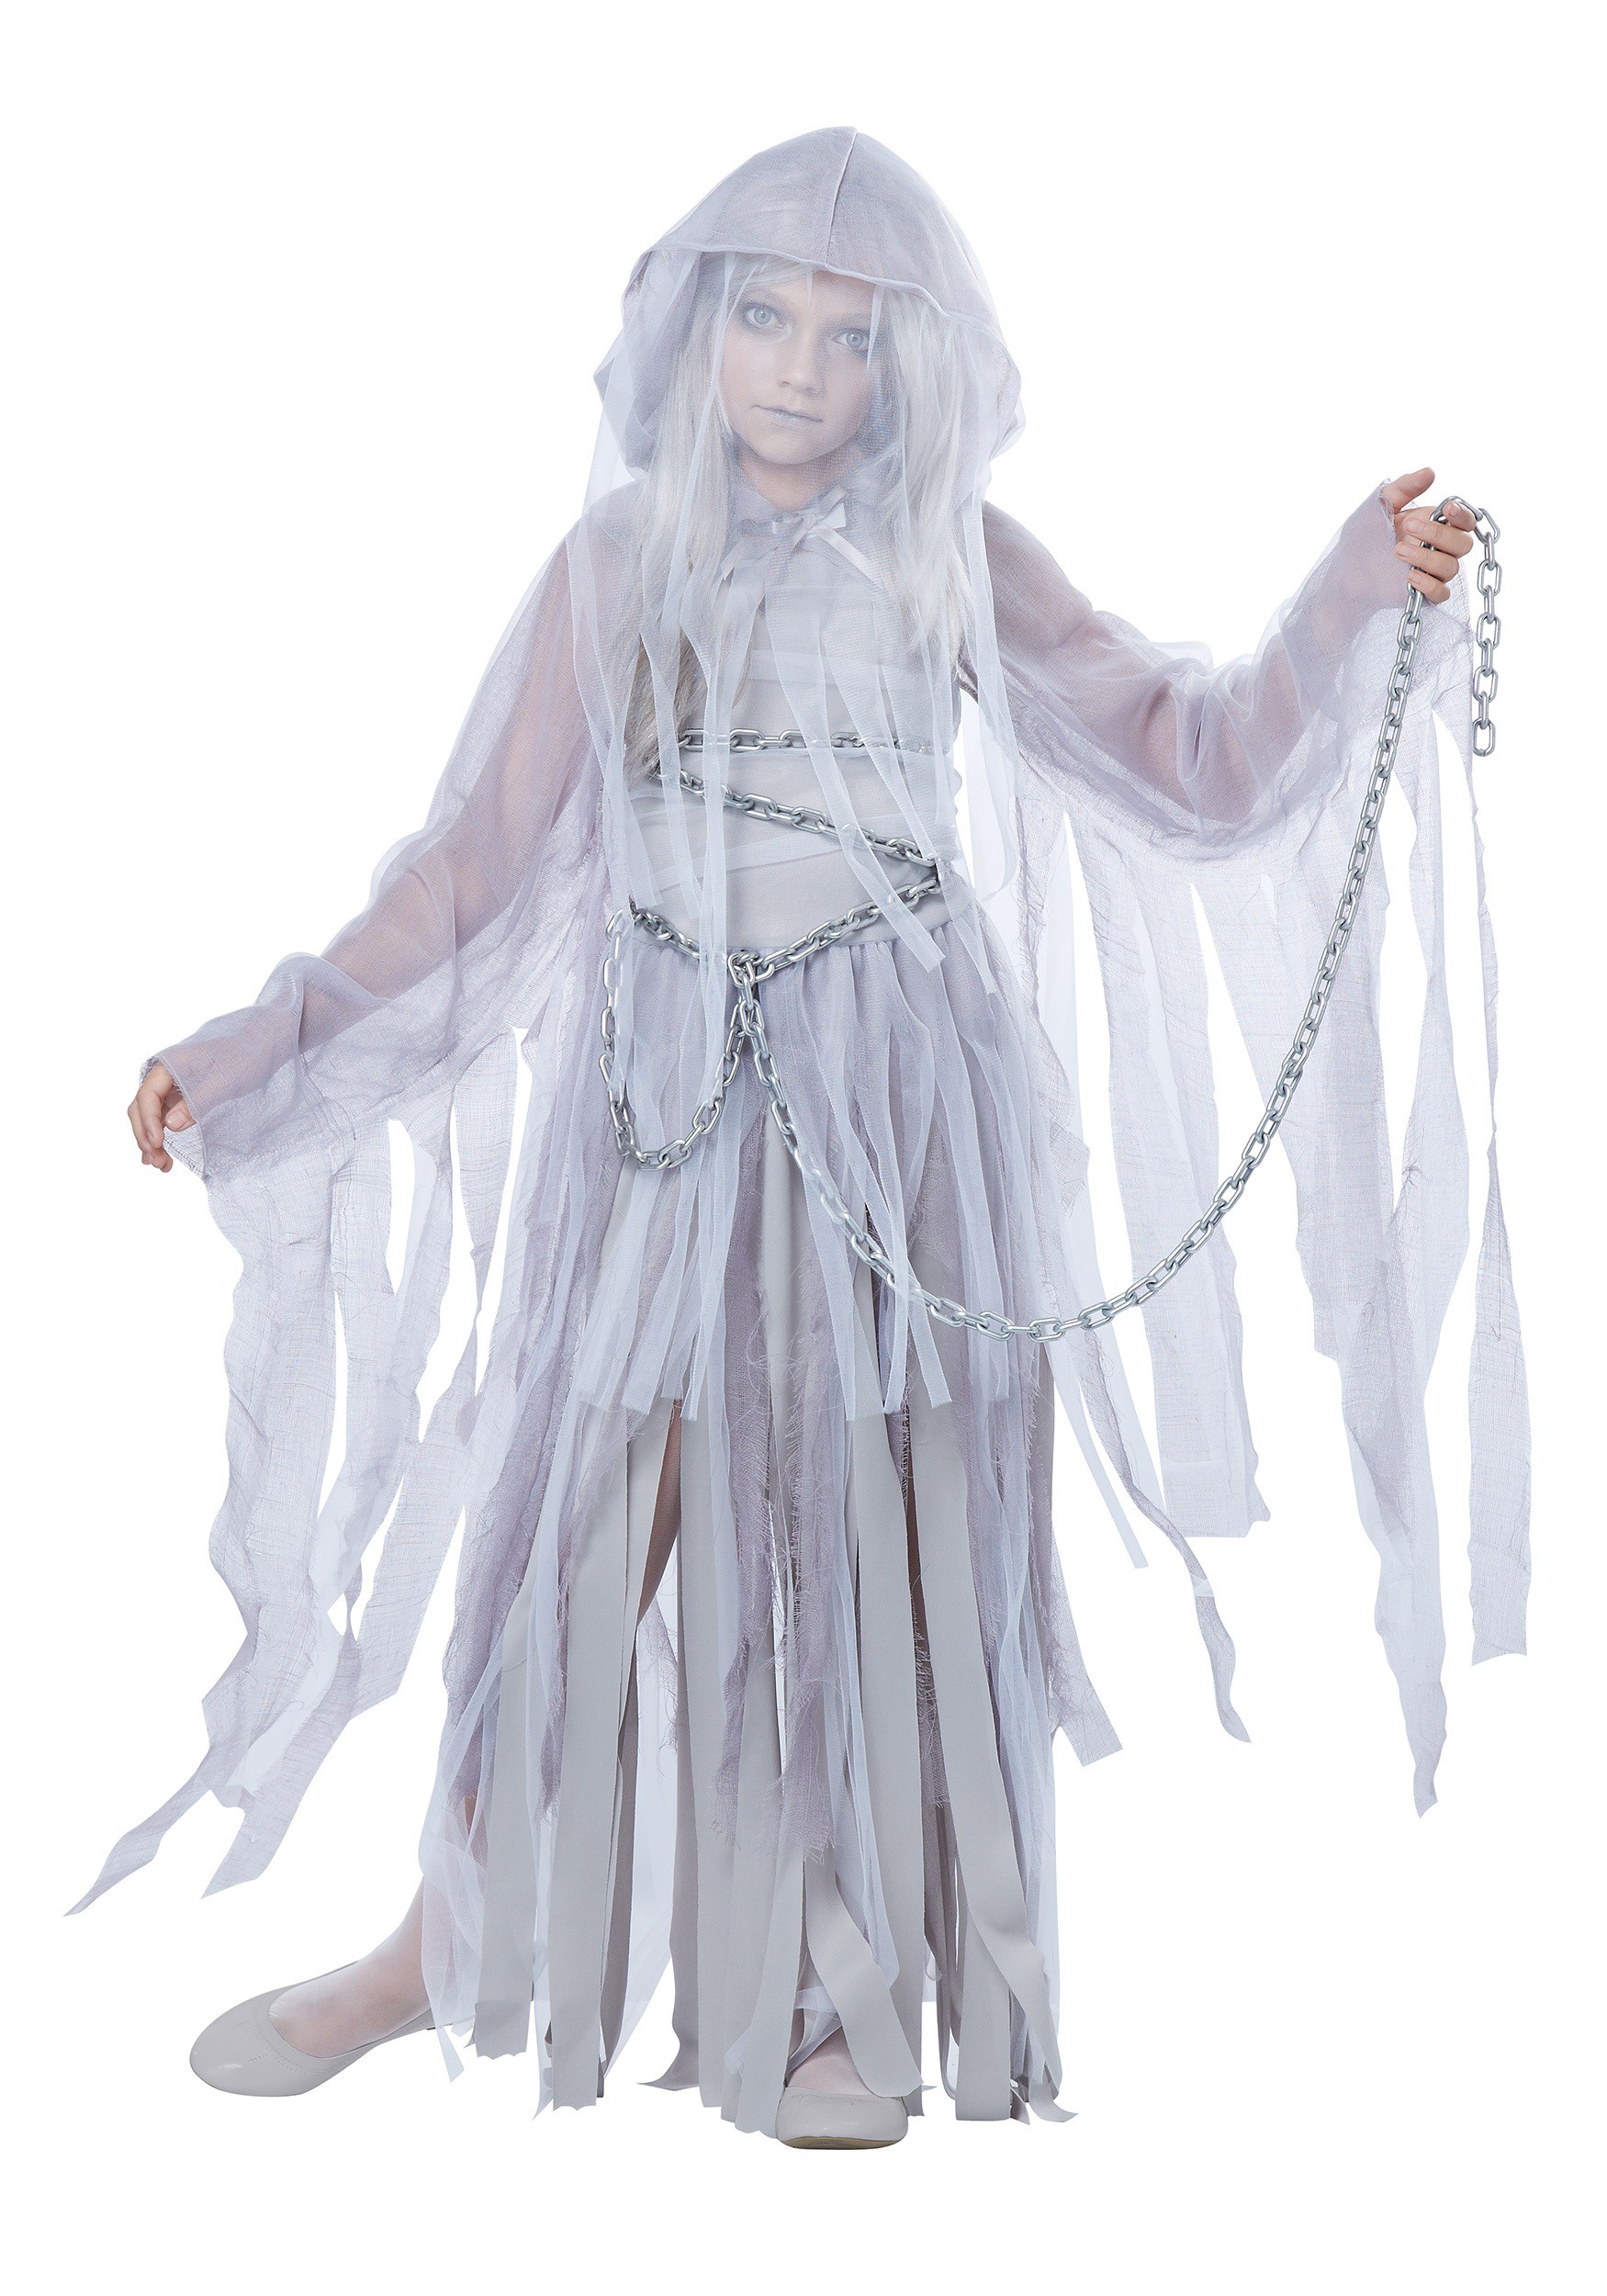 GIRLS GOTHIC GREY SPIDER PRINCESS HALLOWEEN GHOST DRESS COSTUME OUTFIT 4-6-8-10 